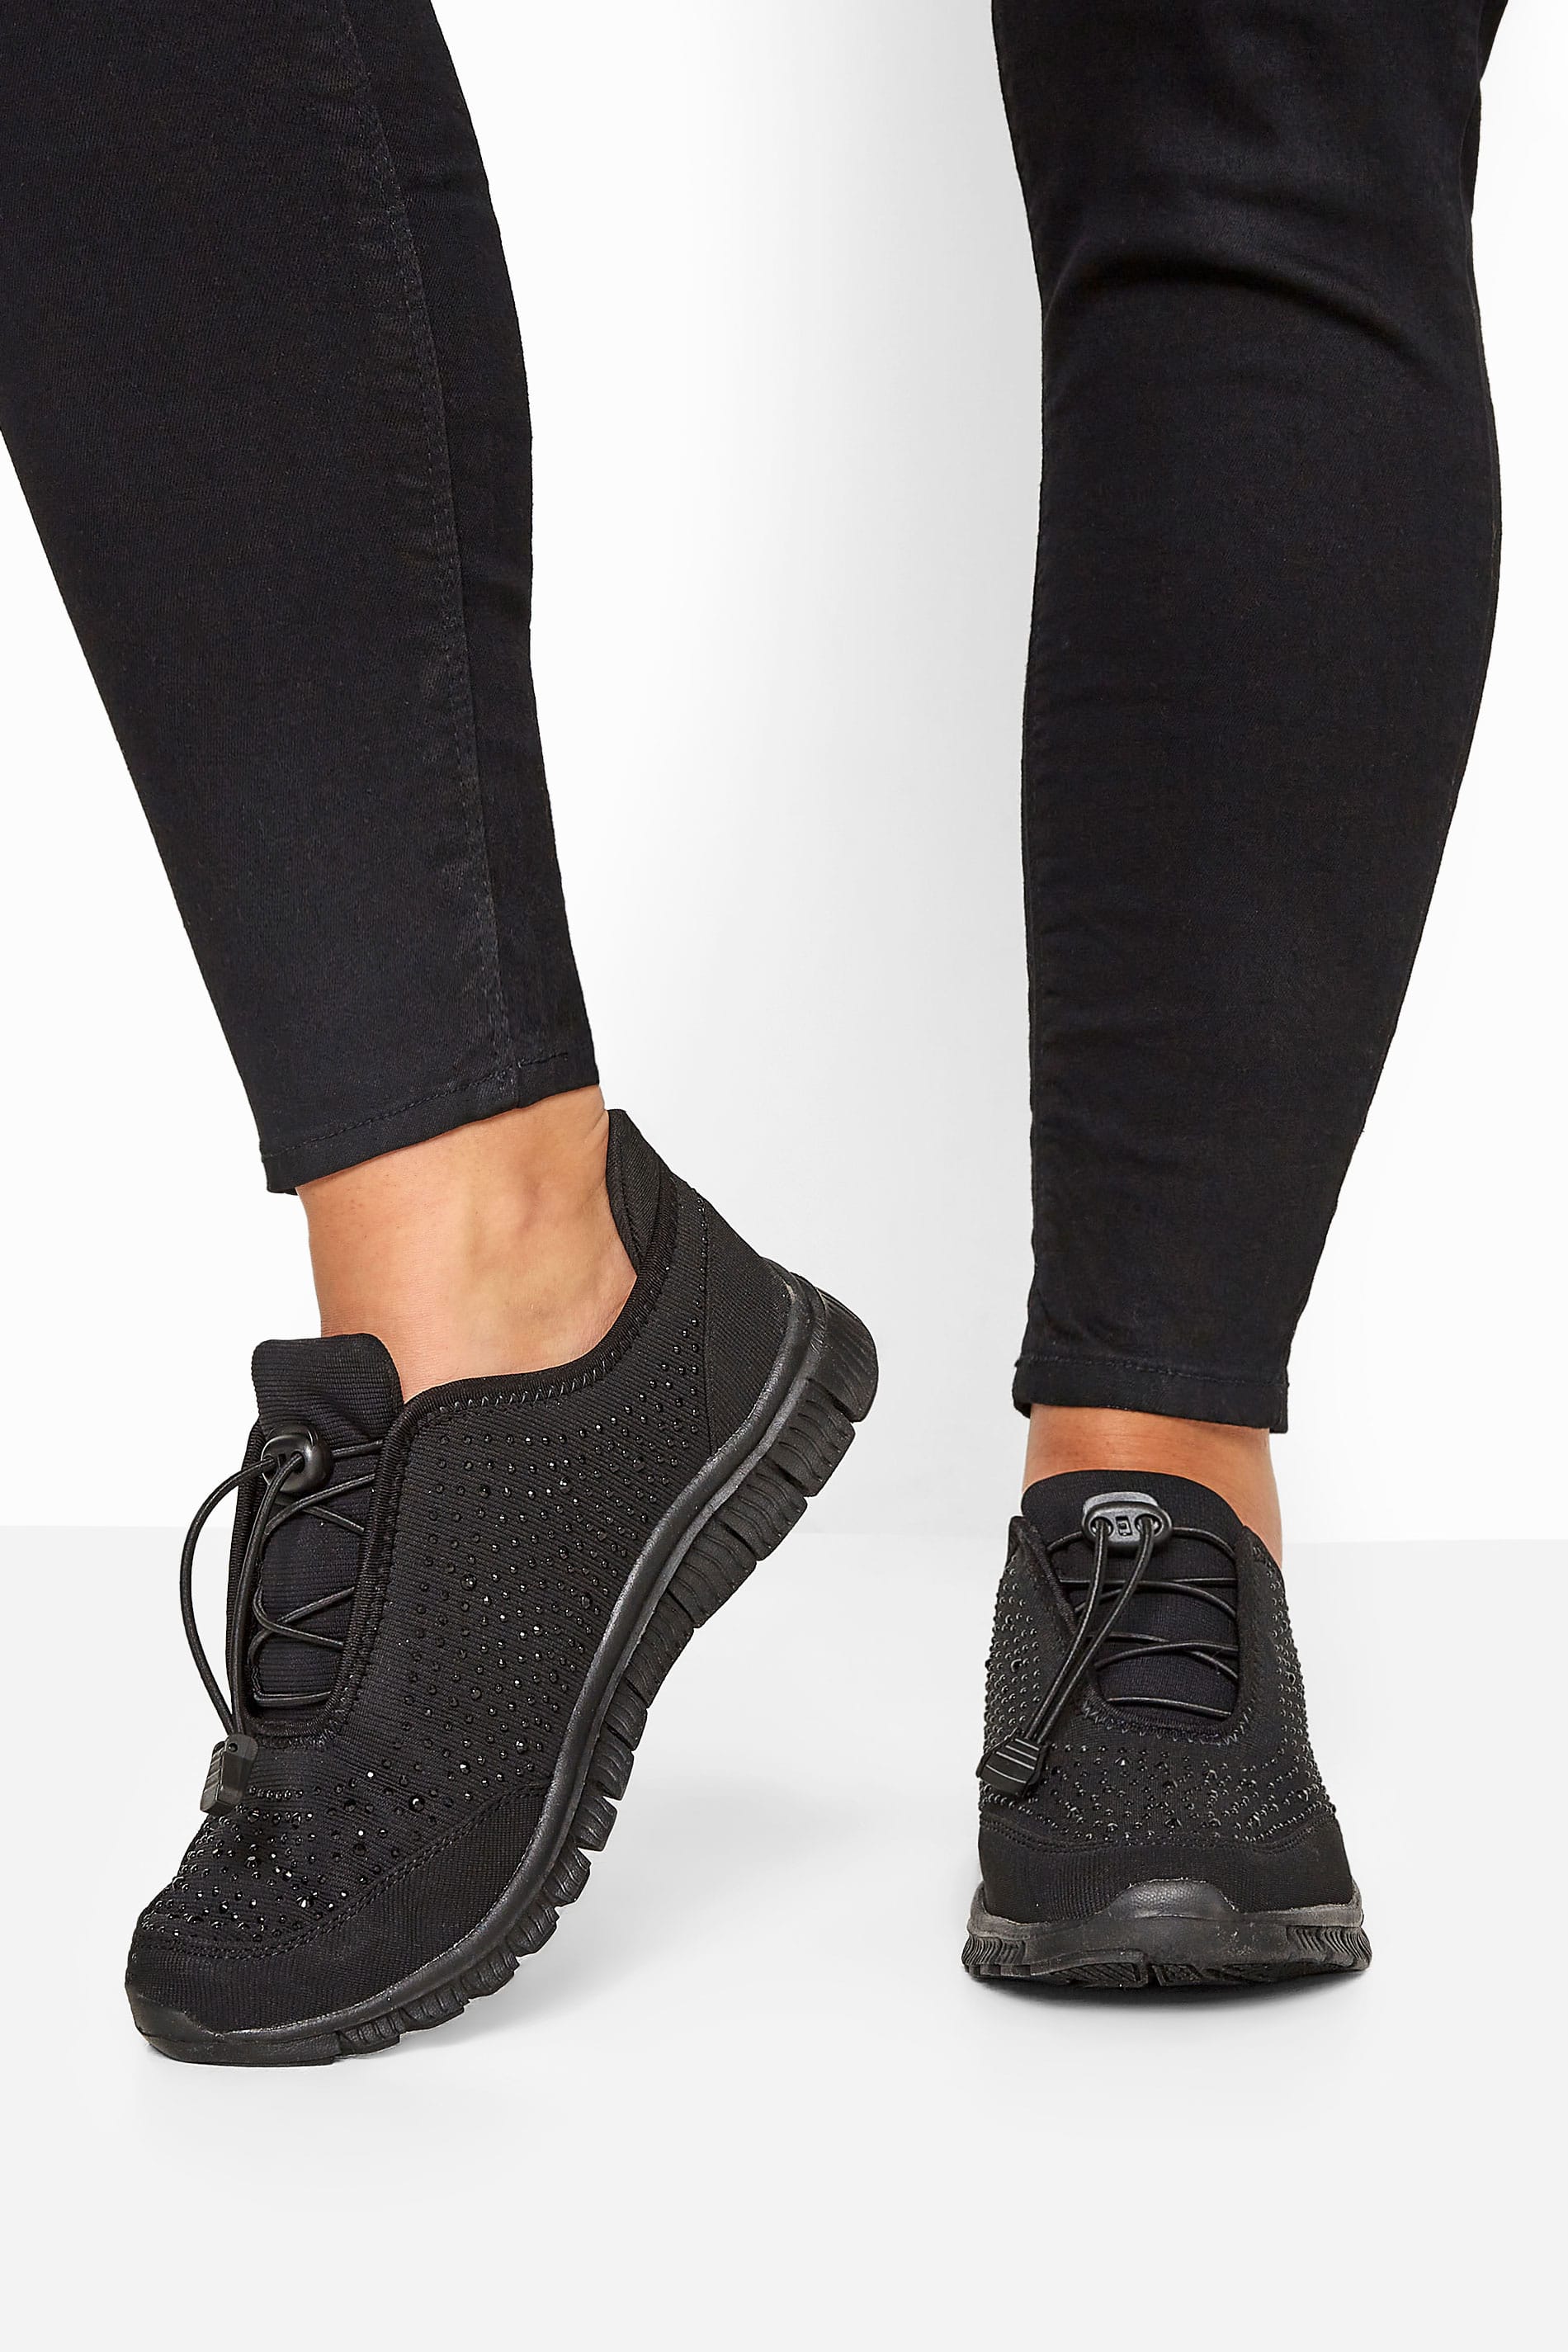 Black Embellished Drawcord Trainers In Extra Wide EEE Fit 1